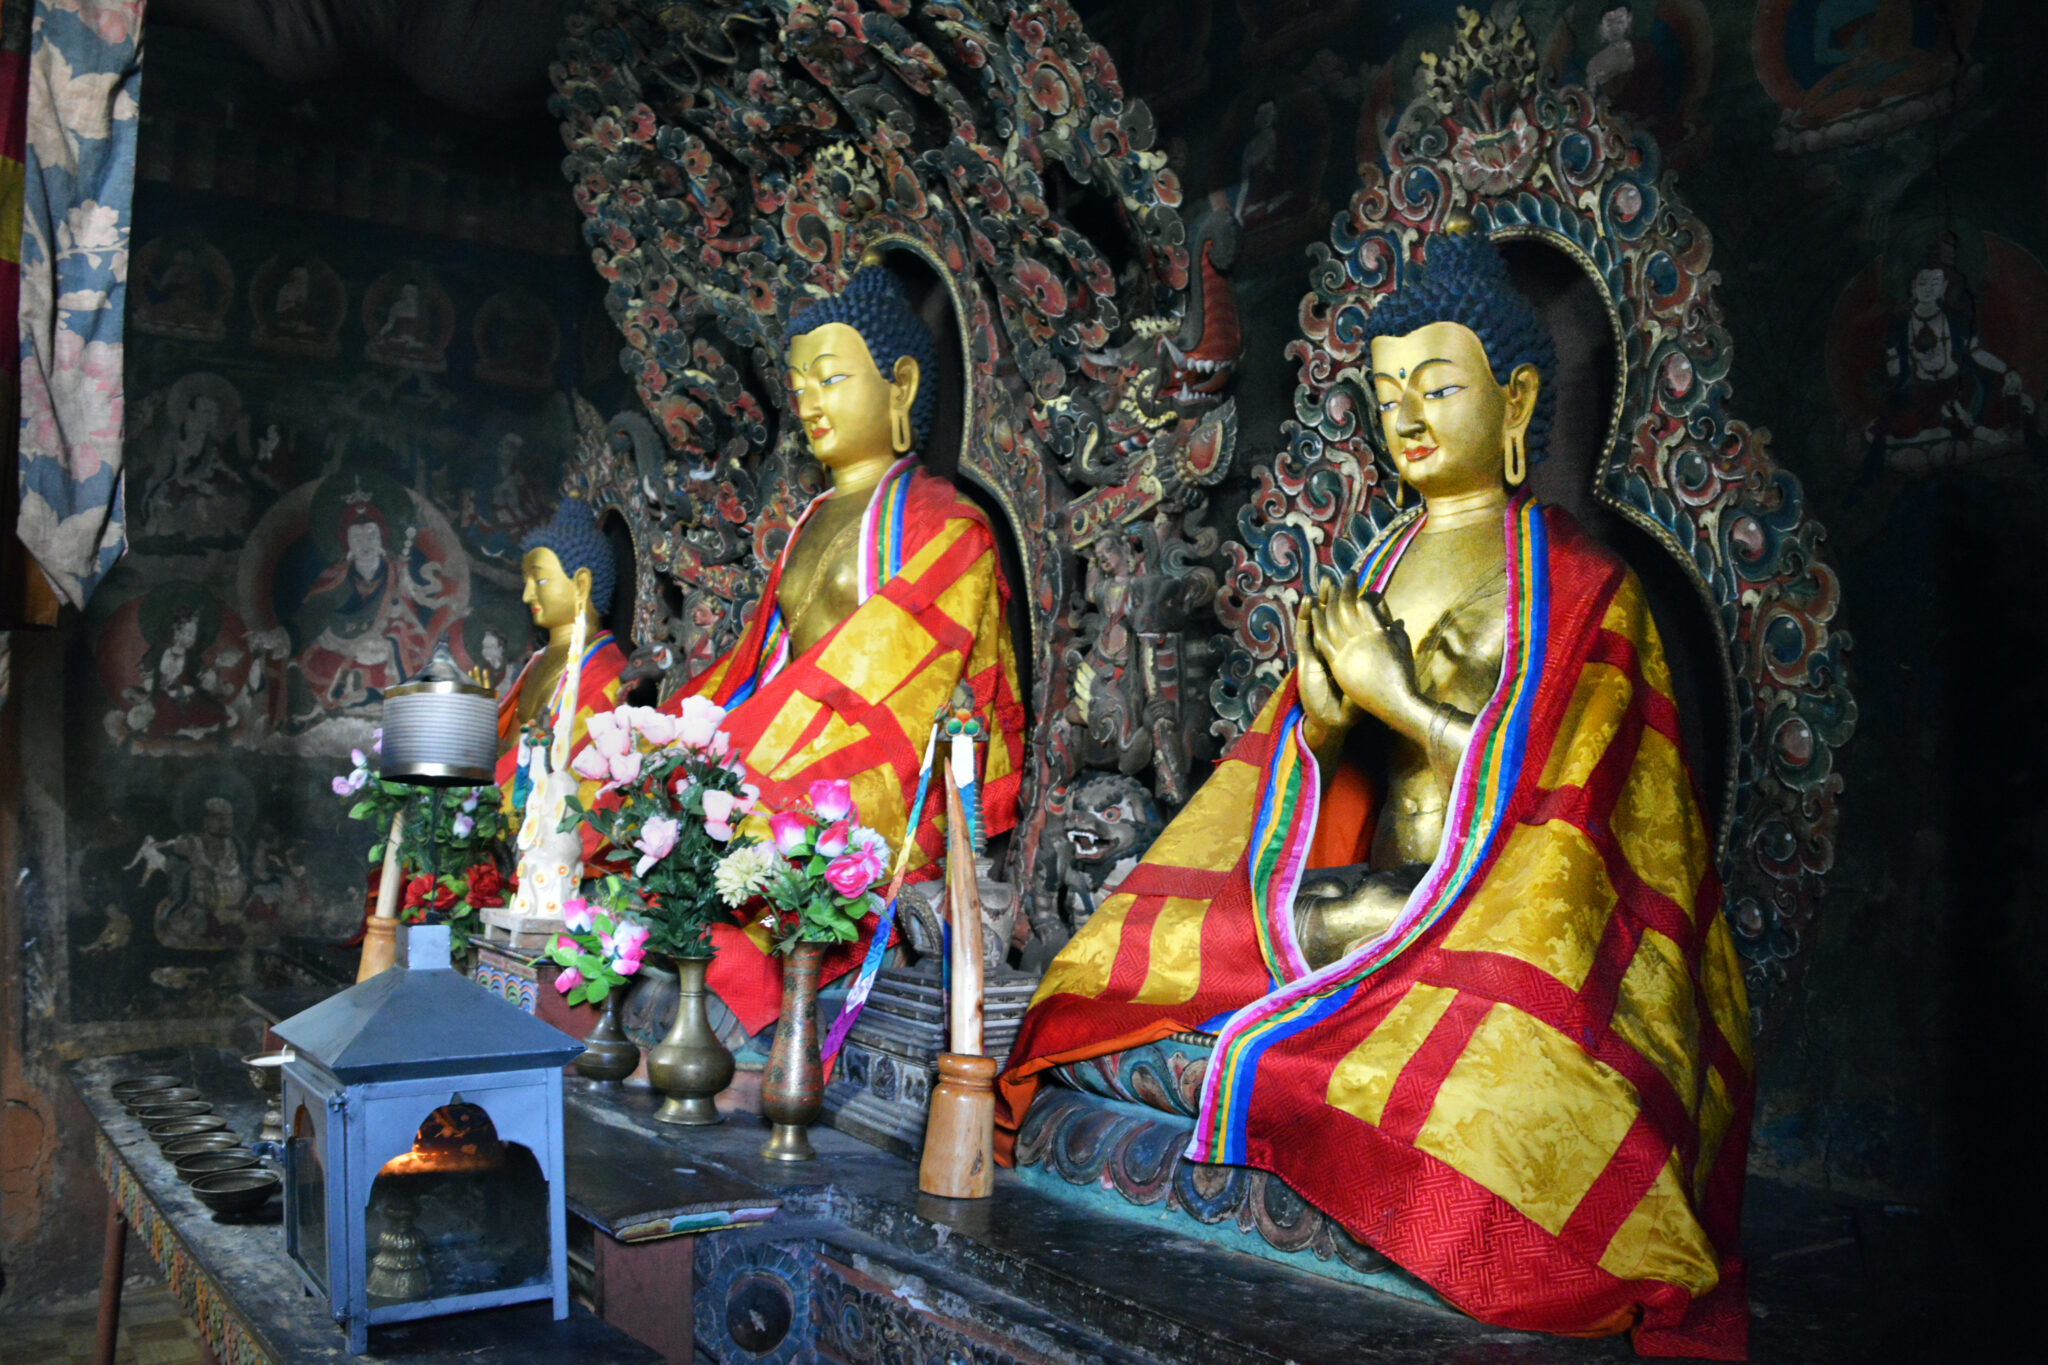 Three golden Buddhas wearing saffron and red cloaks seated before mandorlas in niche decorated with murals